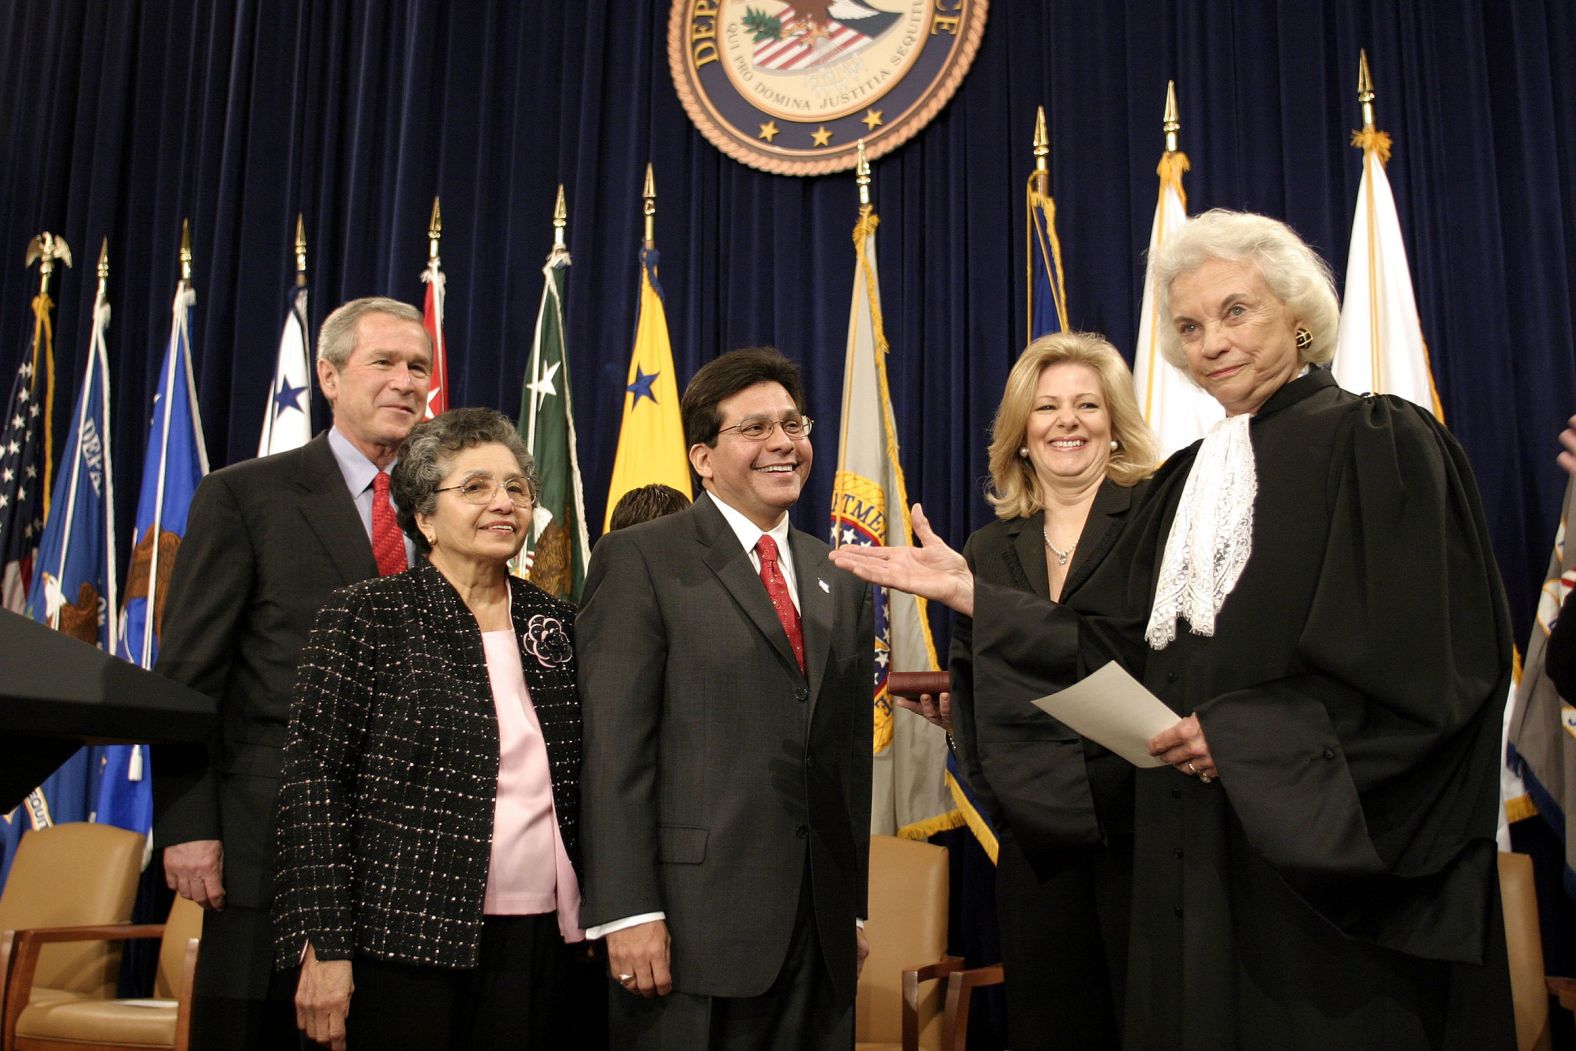 O'Connor is joined by President George W. Bush, left, as she swears in Attorney General Alberto Gonzales in 2005. Gonzales' mother, Maria, is second from left and his wife, Rebecca, is second from right.